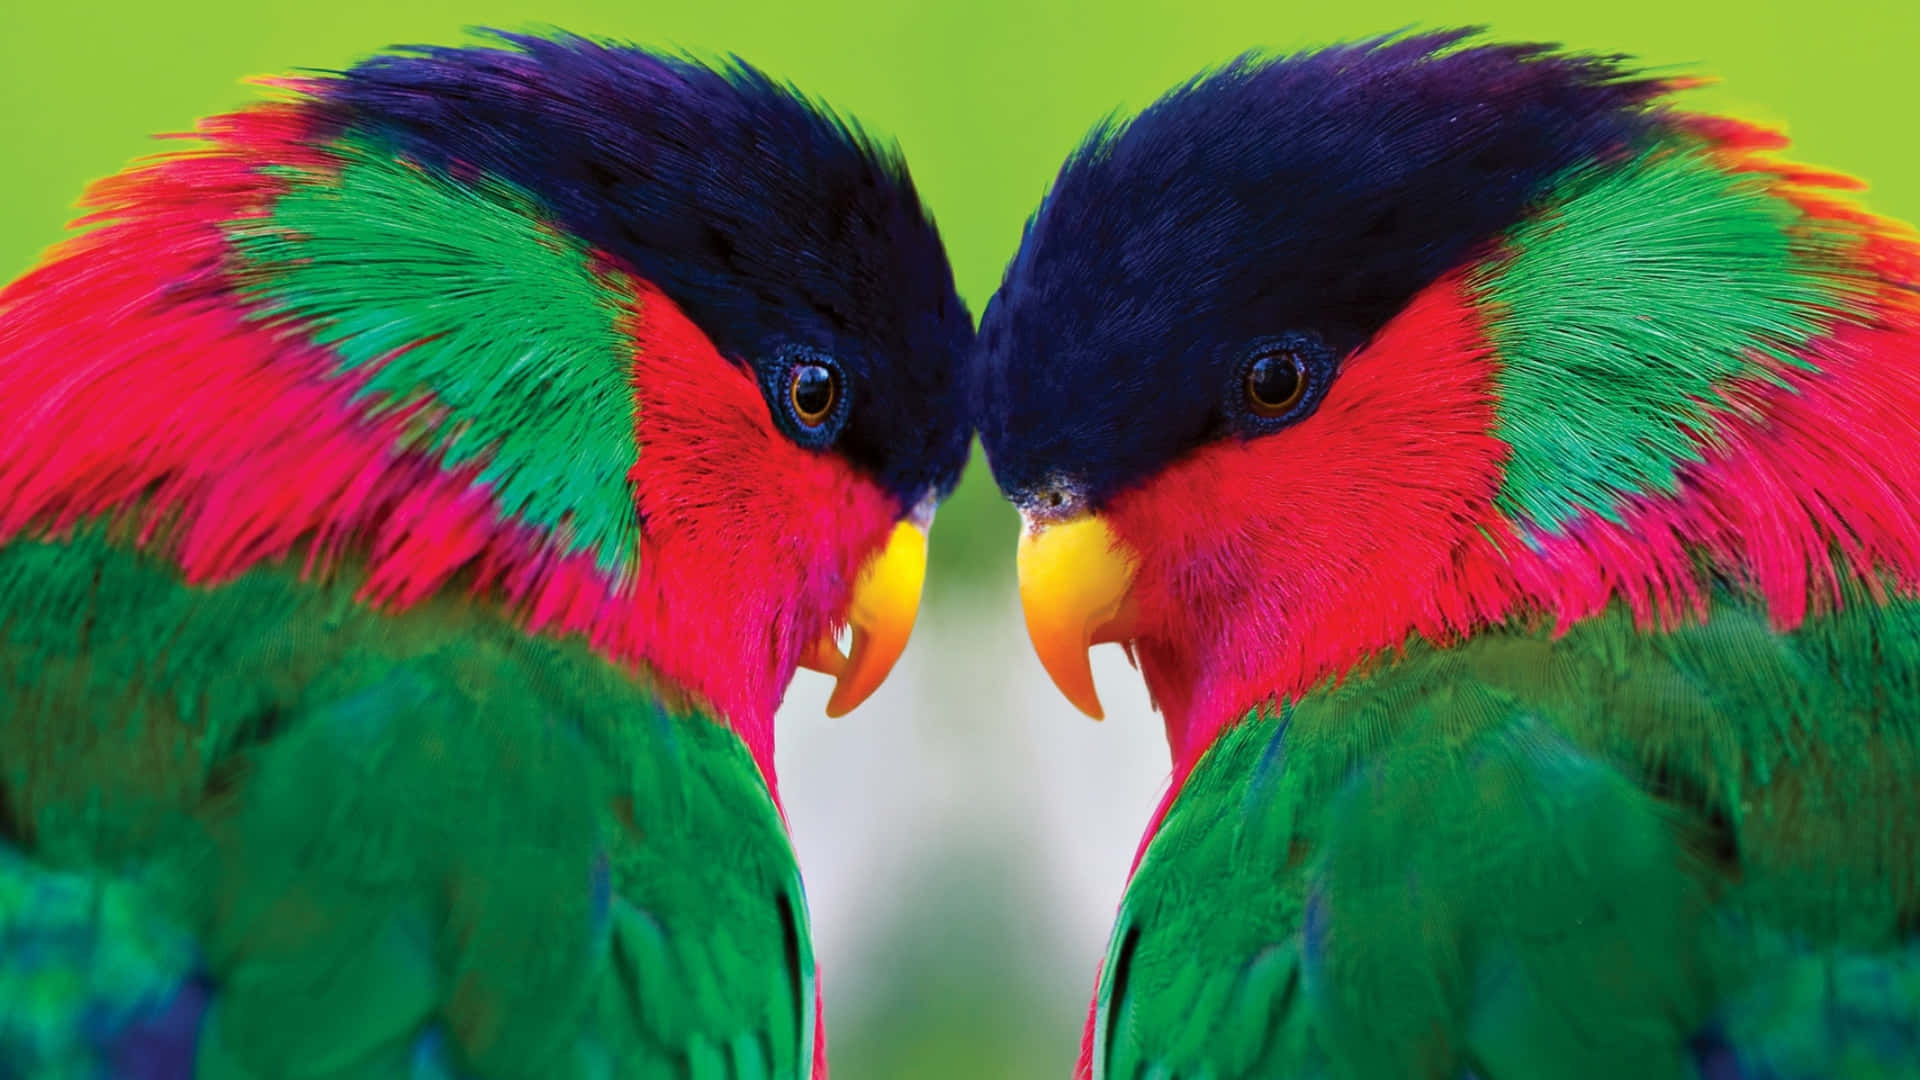 Colorful Lorikeets Facing Each Other Wallpaper